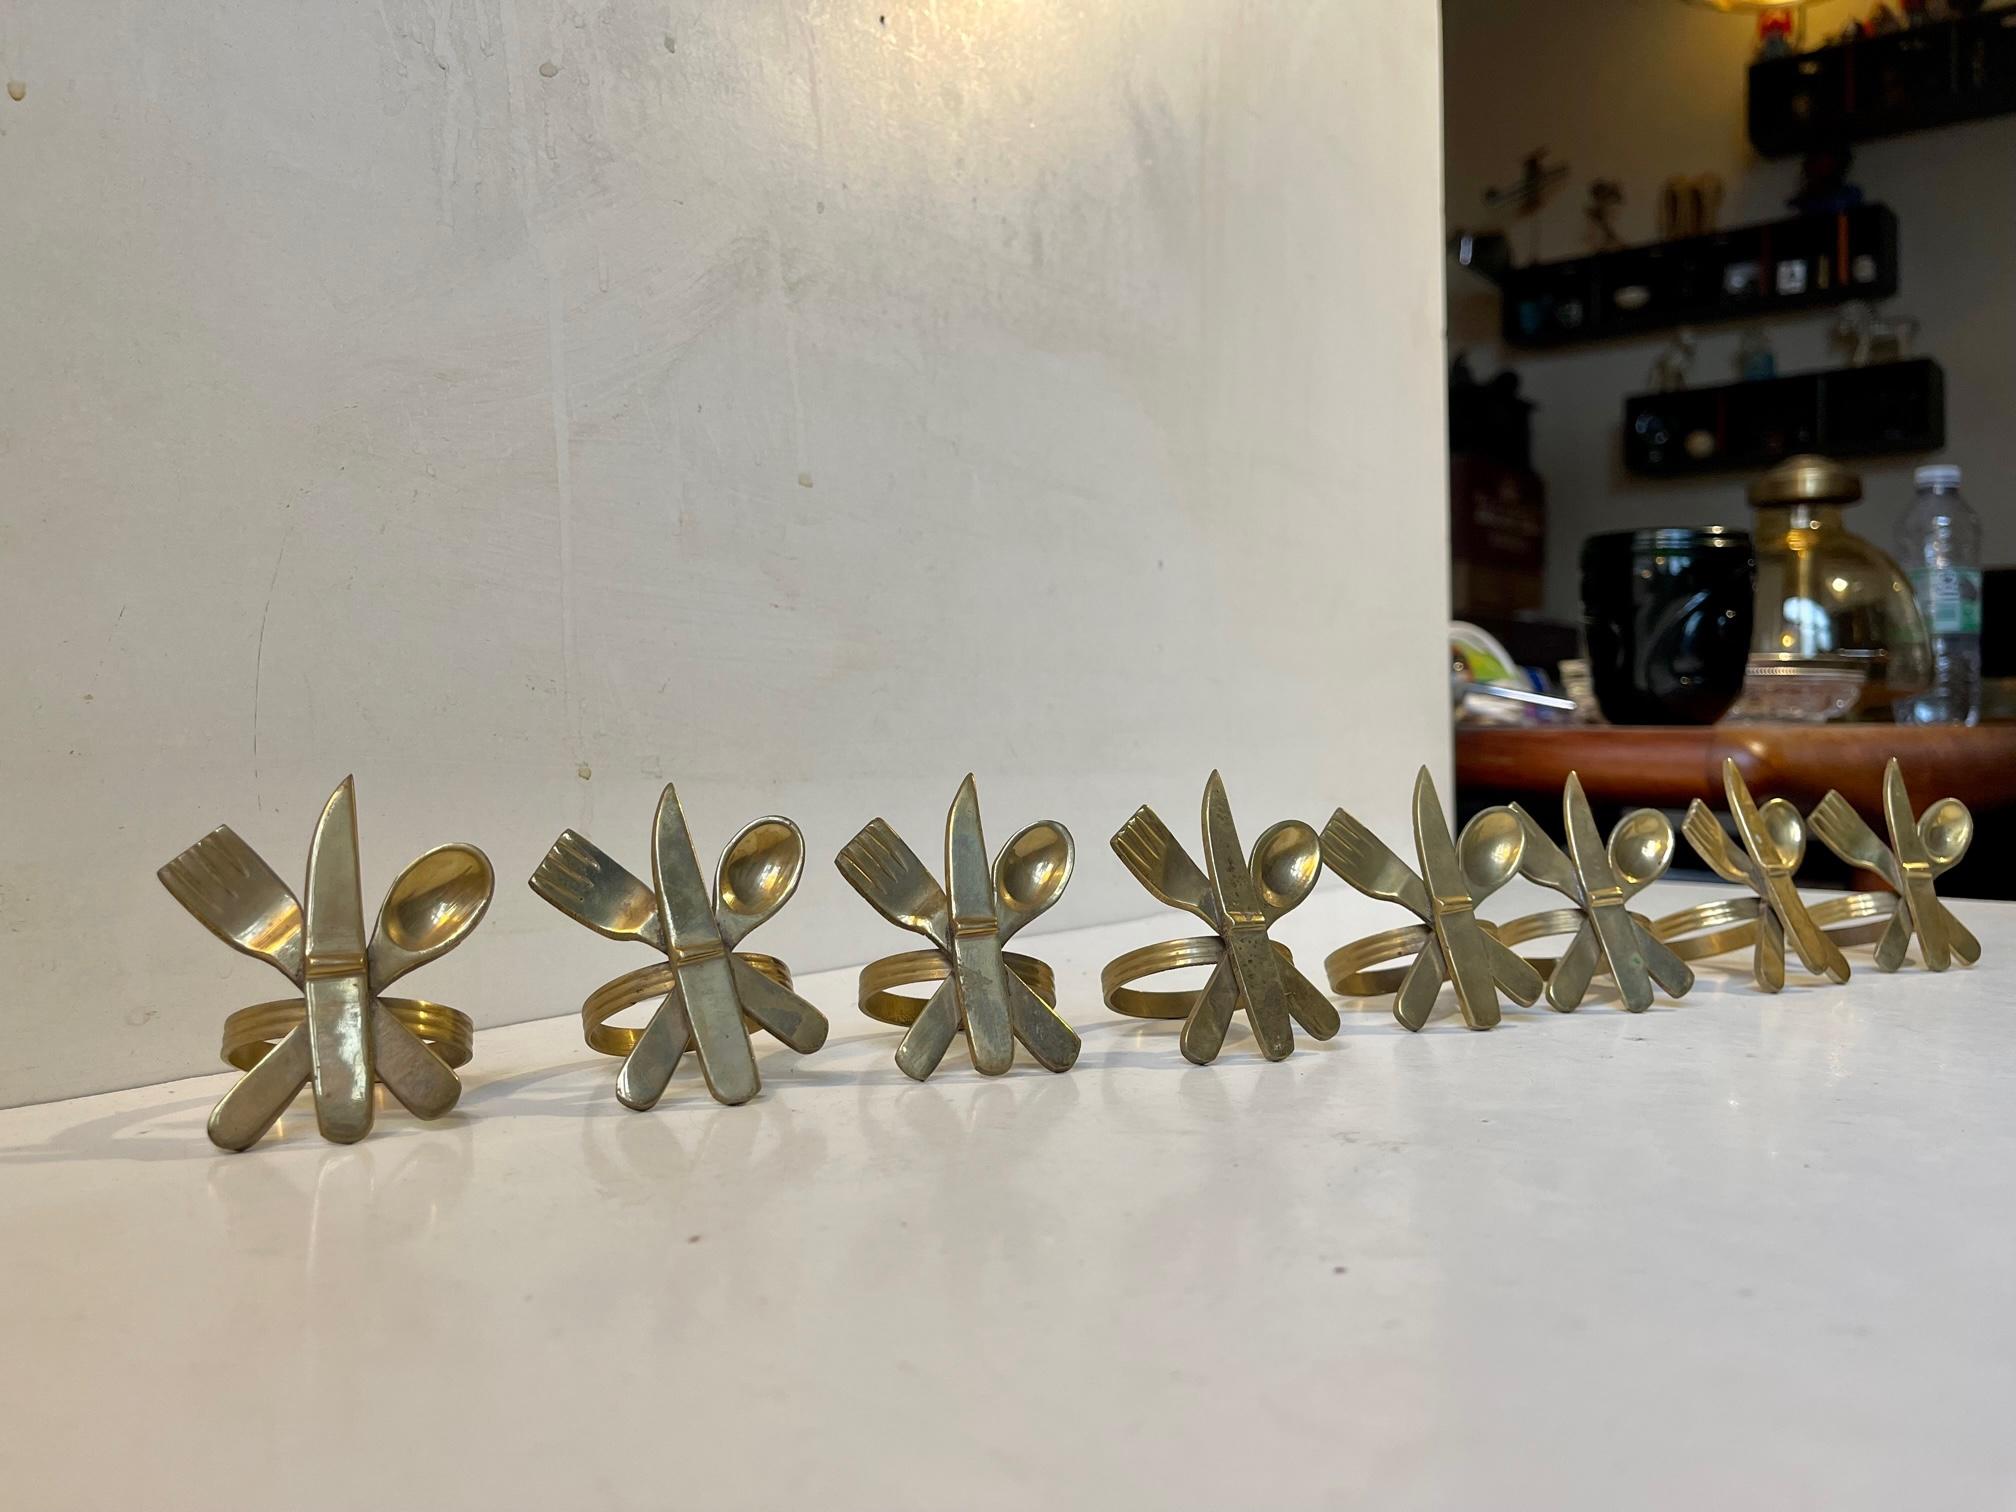 A well-made set of napkin rings cast in brass and featuring motifs of a knife, a fork and a spoon. Made in Scandinavia during the 1960s and originally sold through Illums Bolighus in Copenhagen. Measurements: H/W: 6/5 cm, Ring diameter: 4 cm. This